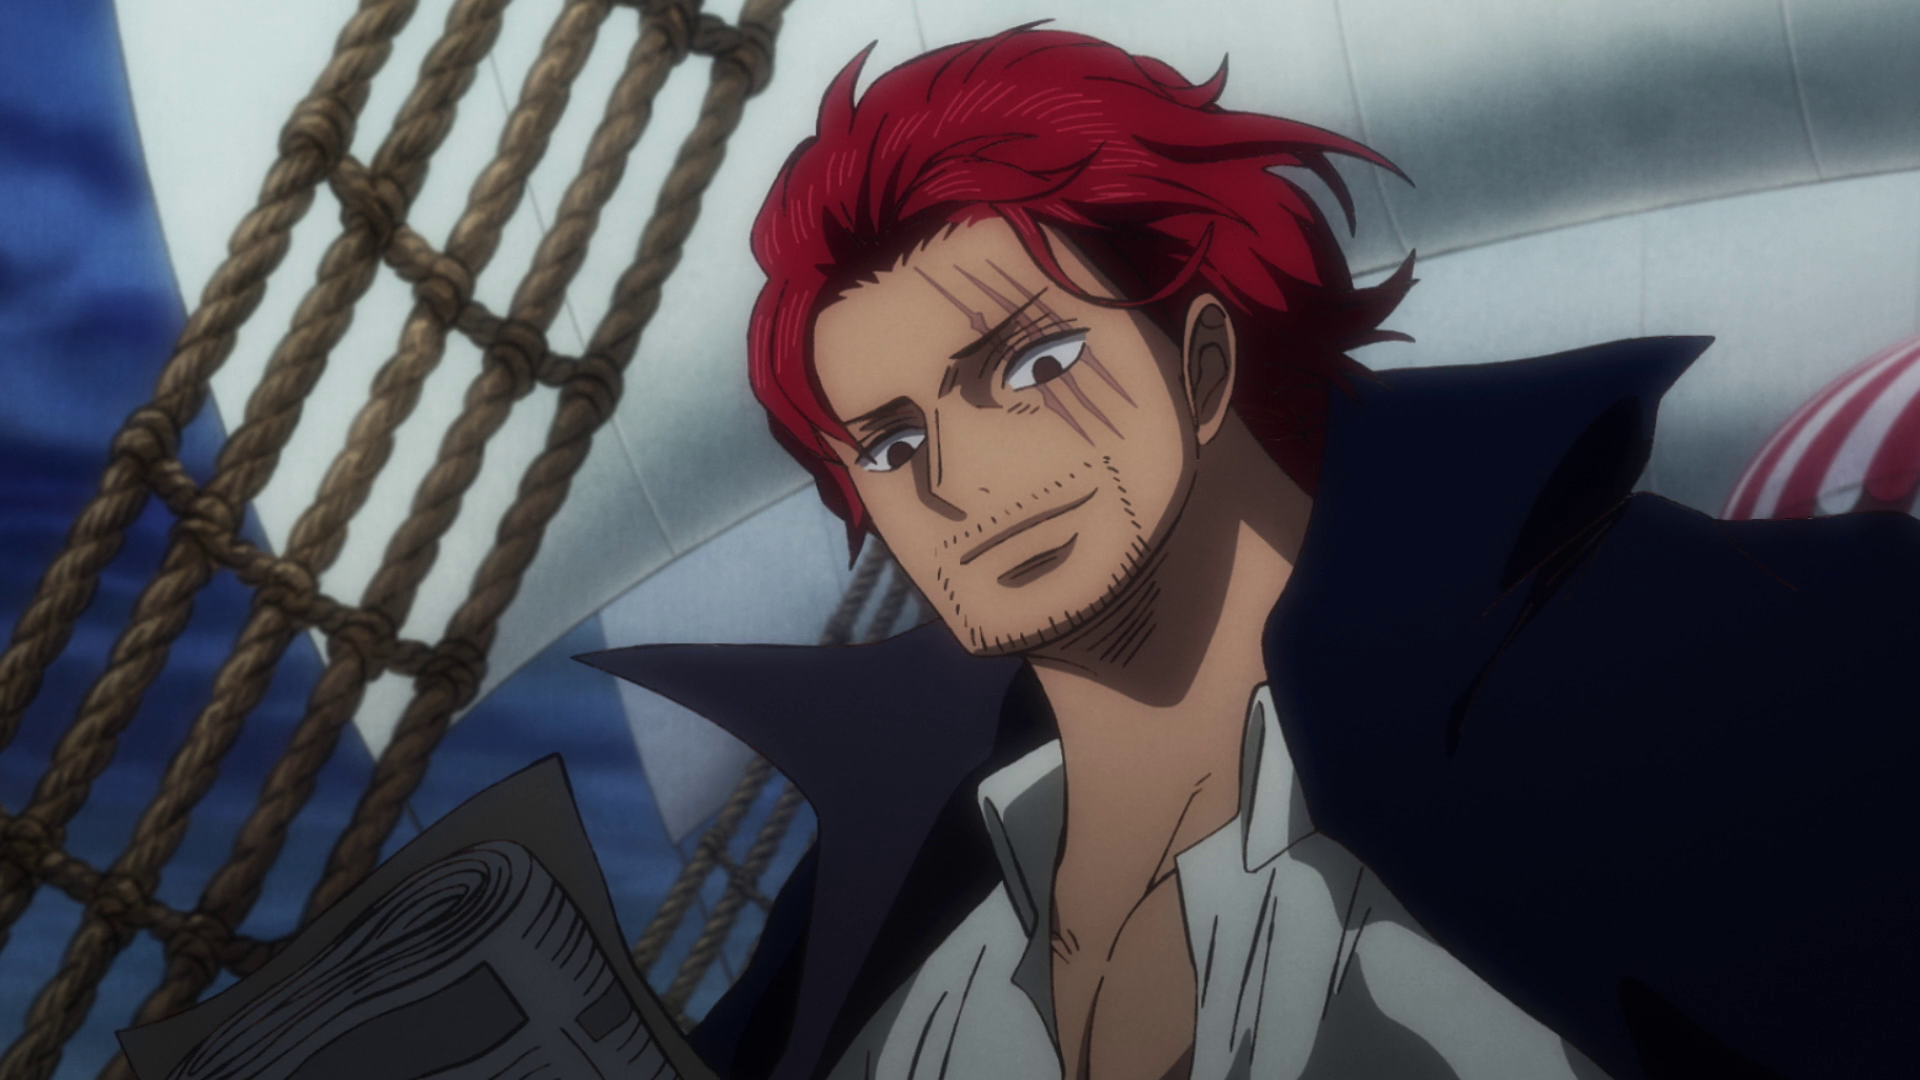 Shanks Makes Waves Inside Look at One Piece Episode 1081's Epic Showdown in Wano Country-